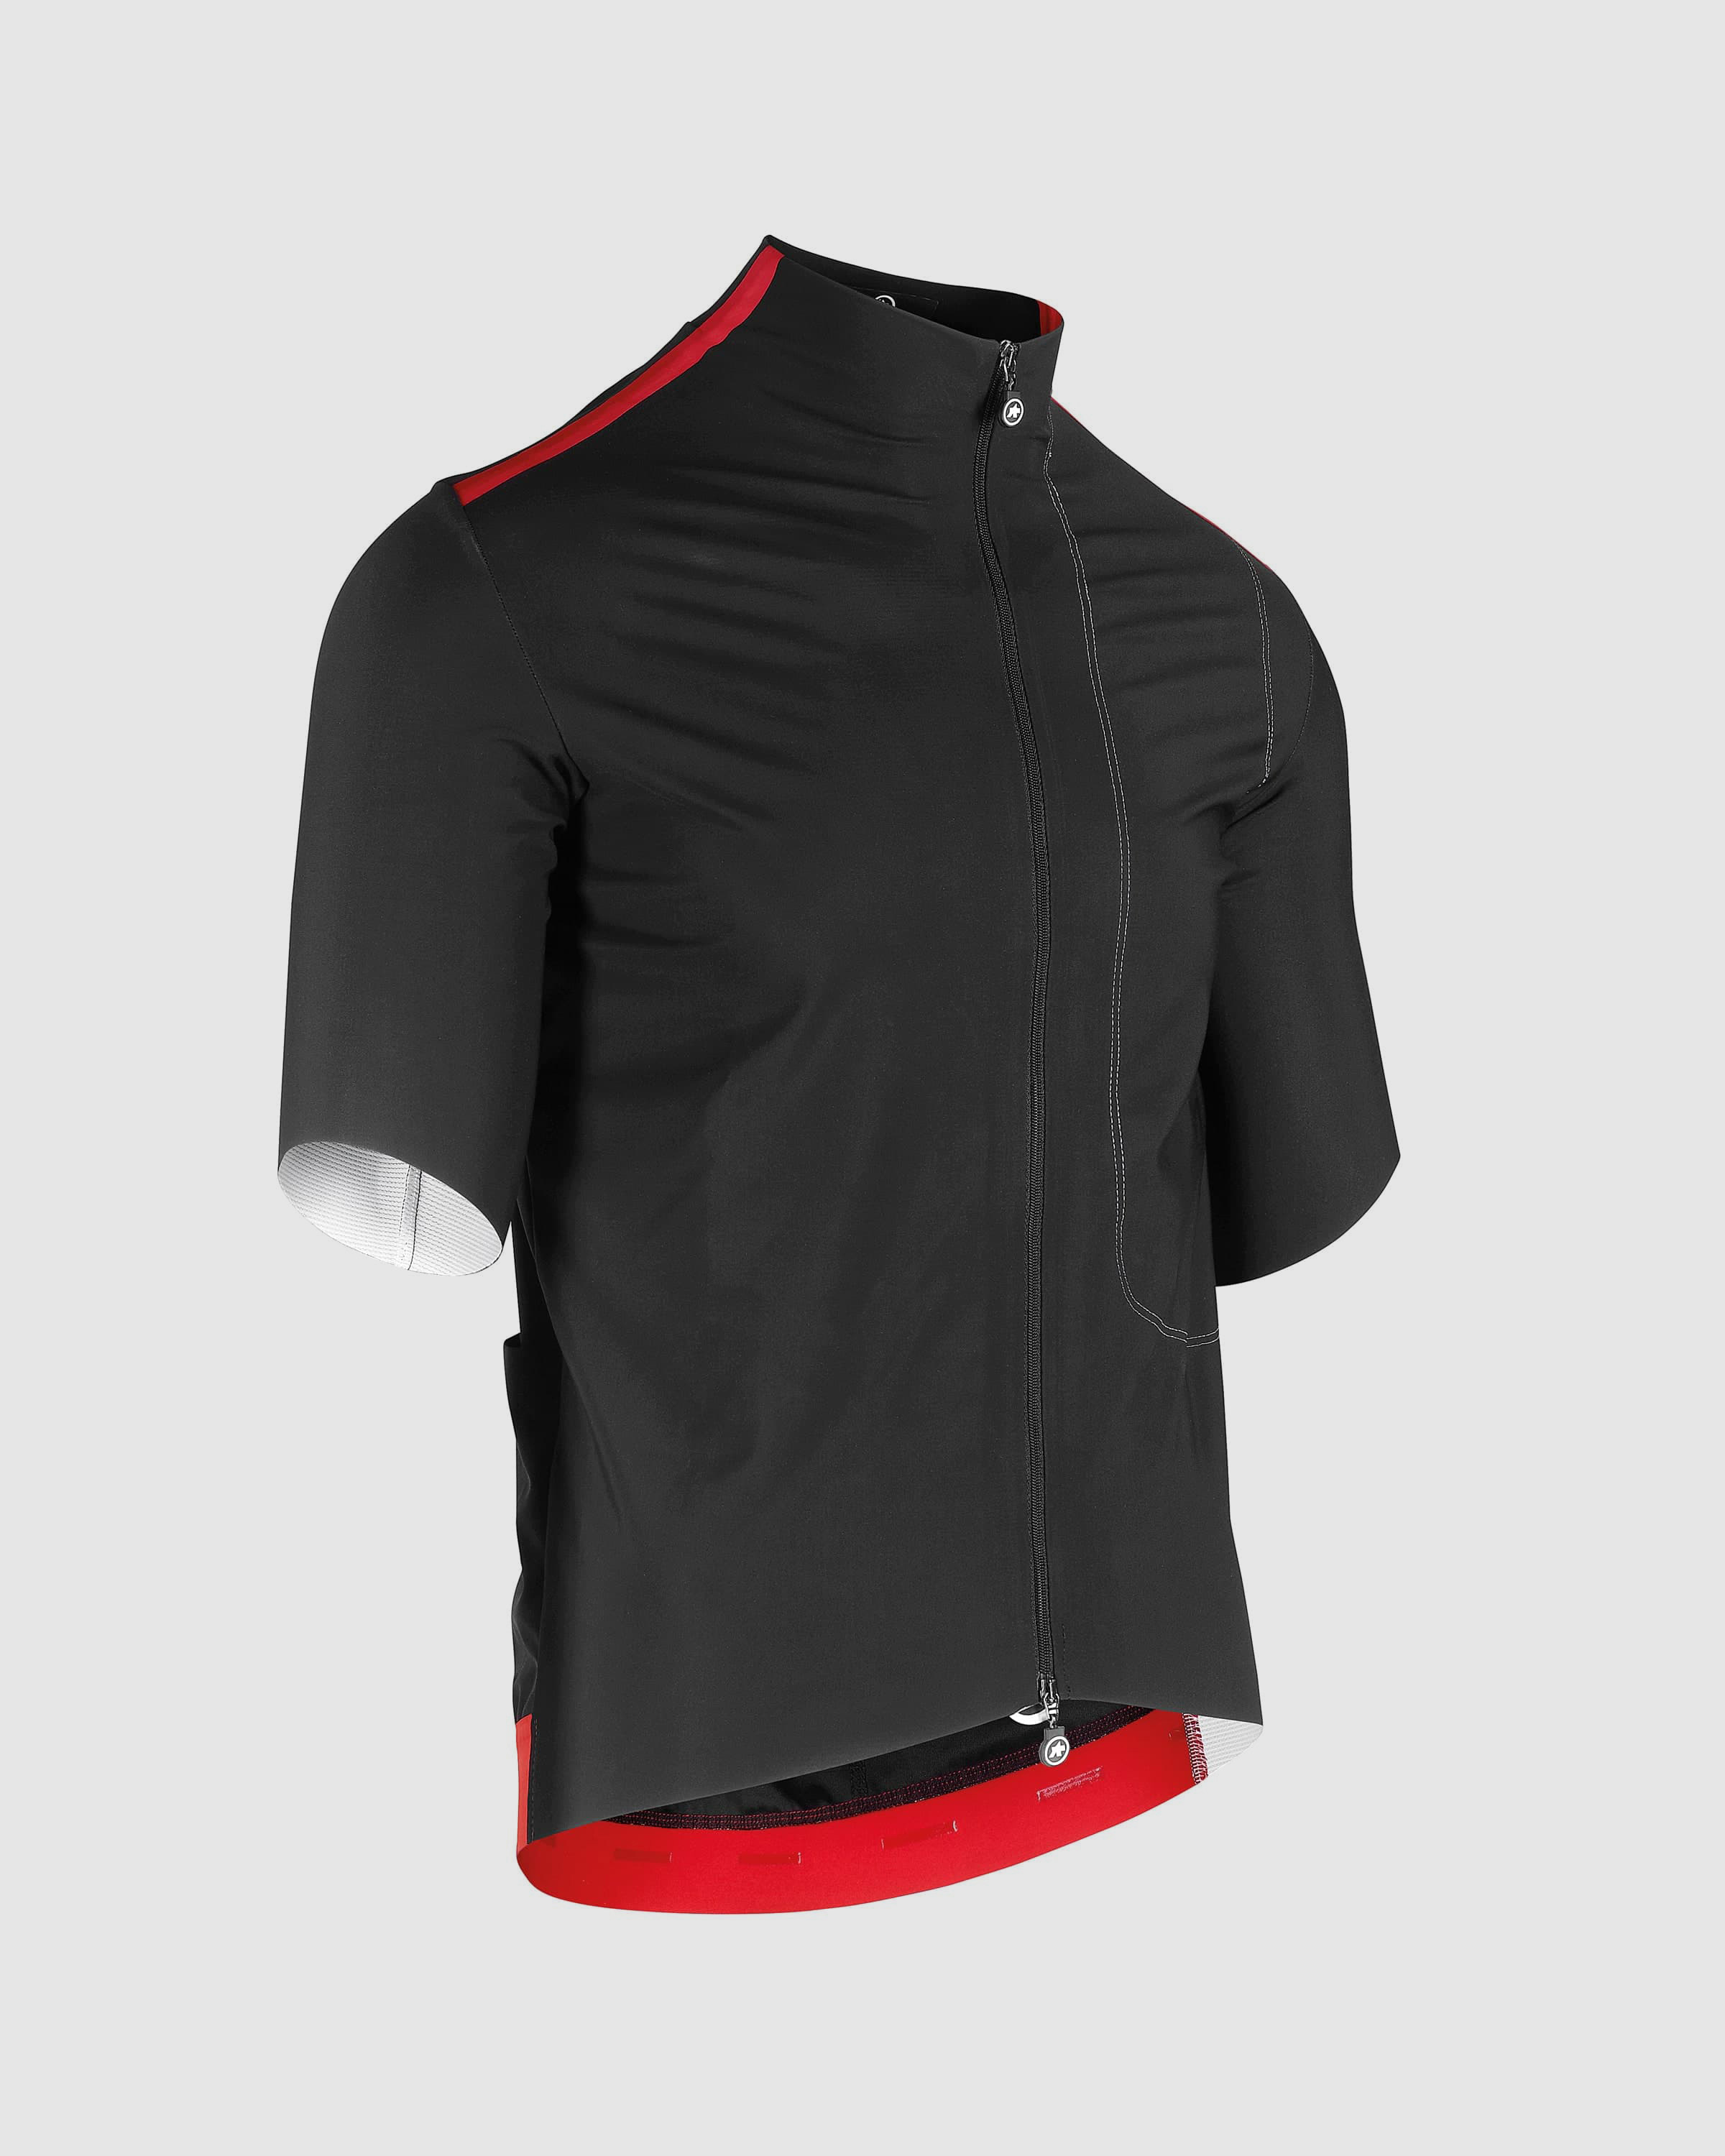 Liberty RS Thermo Rain Jersey - ASSOS Of Switzerland - Official Outlet